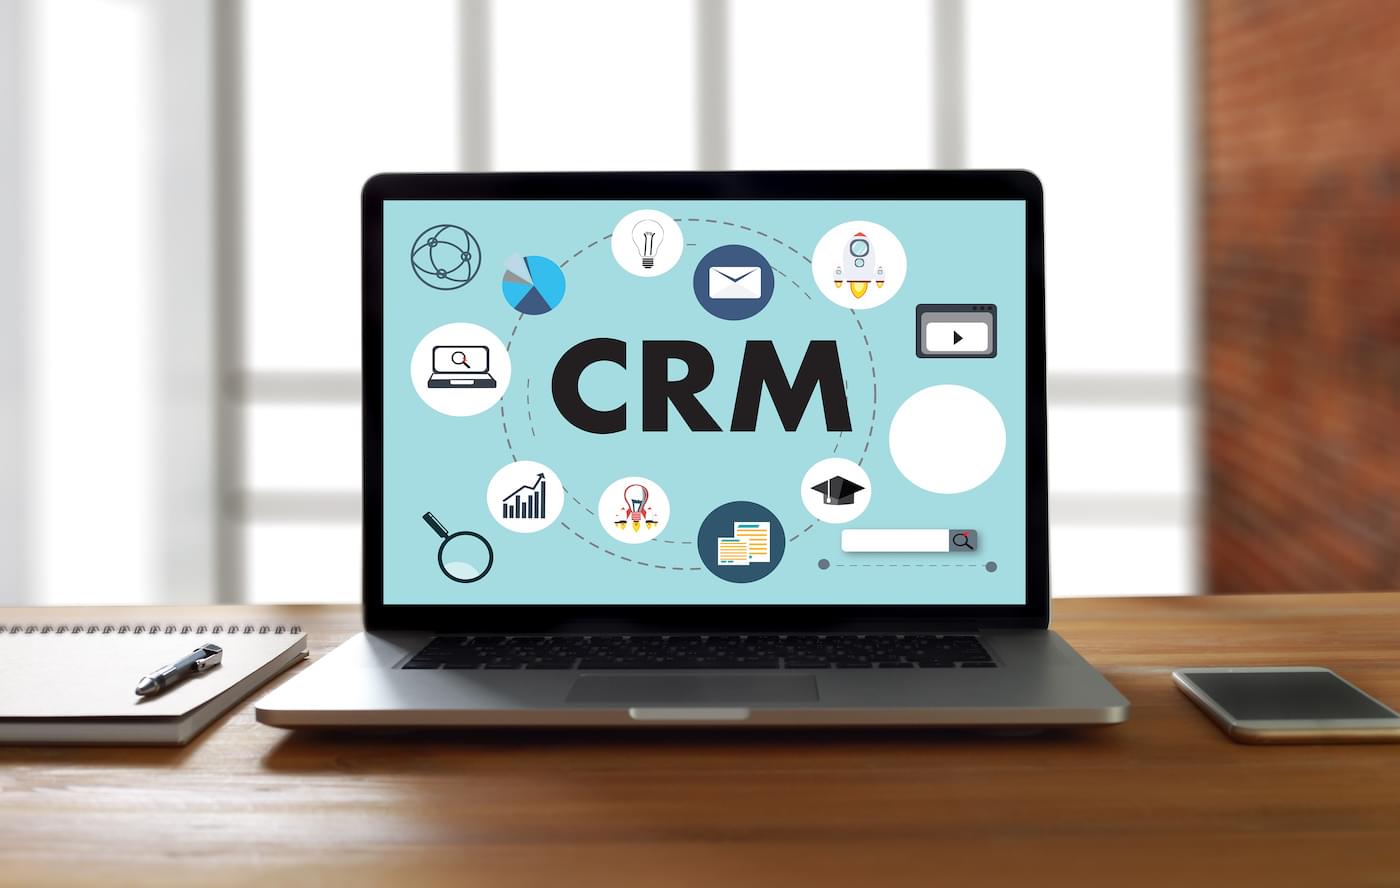 Top CRM Challenges & Strategies for Overcoming Them